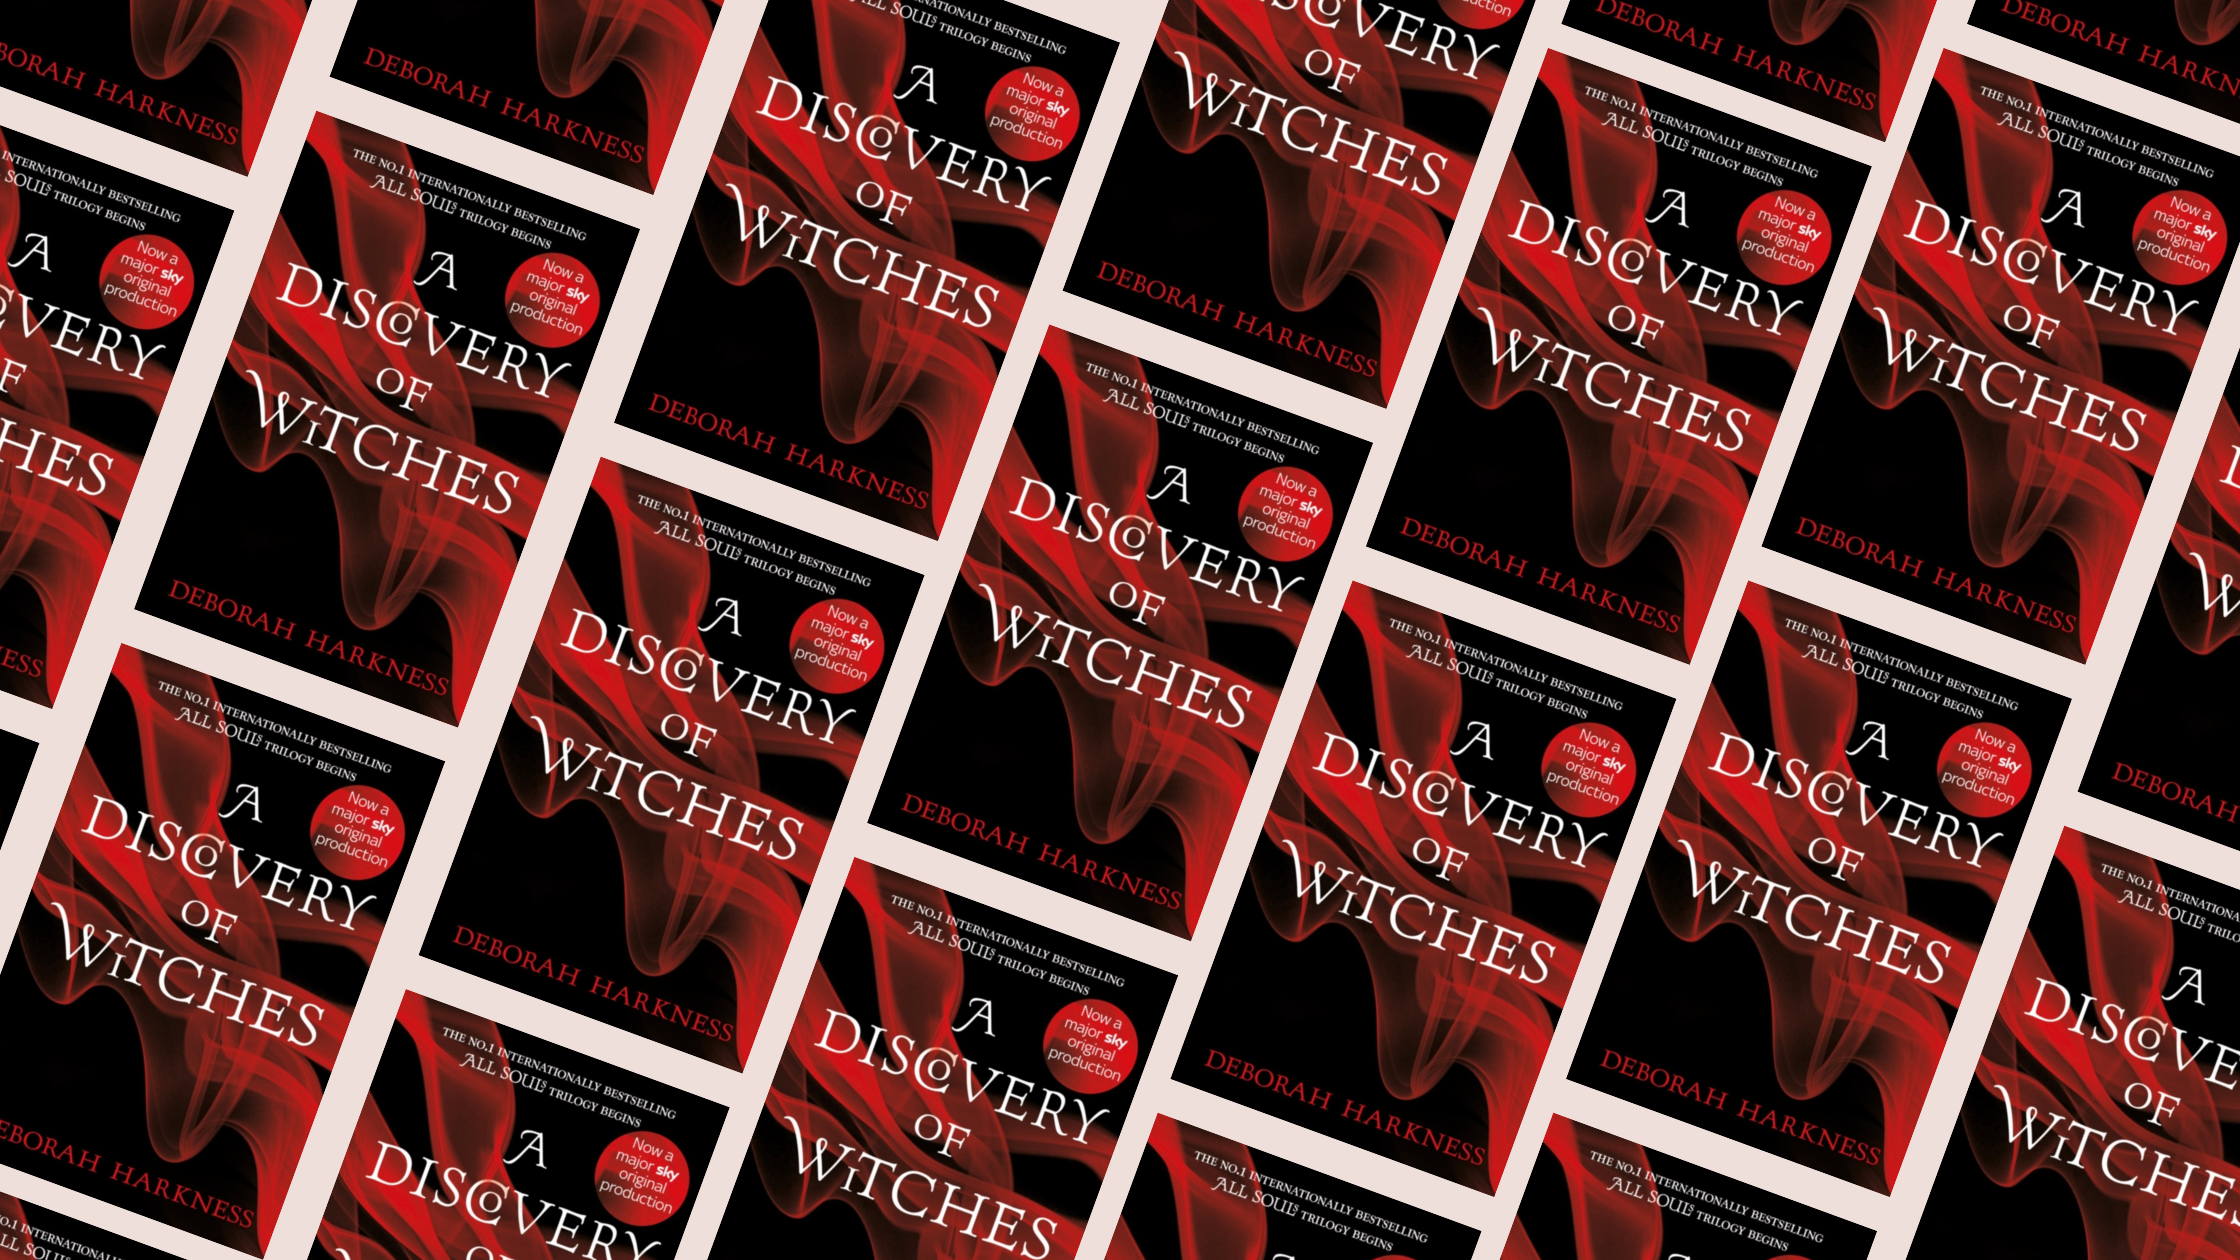 What to read after A Discovery of Witches